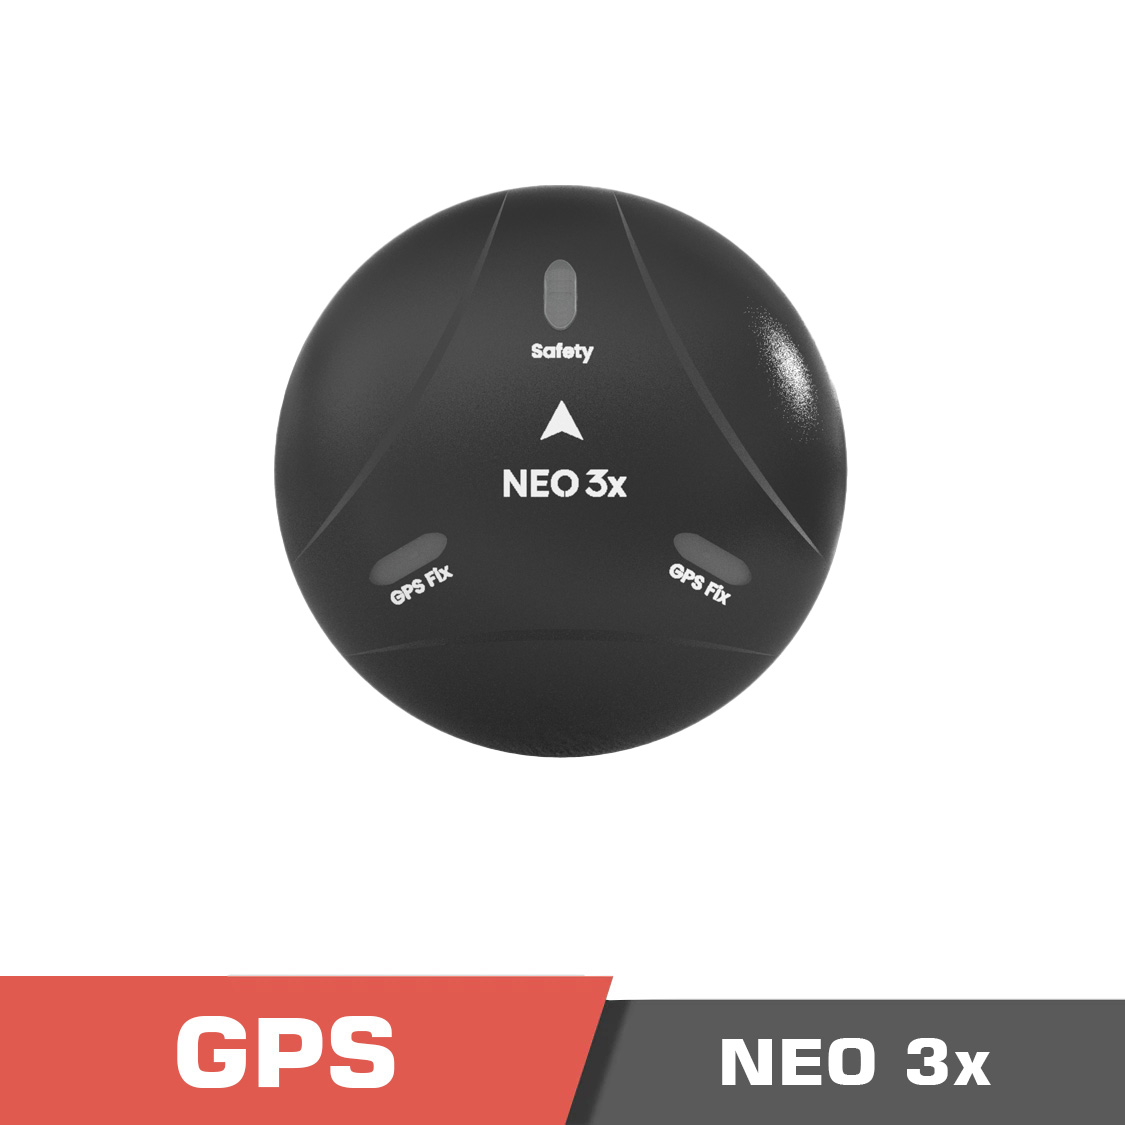 Neo - X6 P-BOX,X6 P-BOX GNSS Series,GNSS,GPS,pixhawk gps,GNSS tracking module,UAV navigation system,P-Box features,UART and USB interface communication,Dual antenna GNSS module - MotioNew - 2